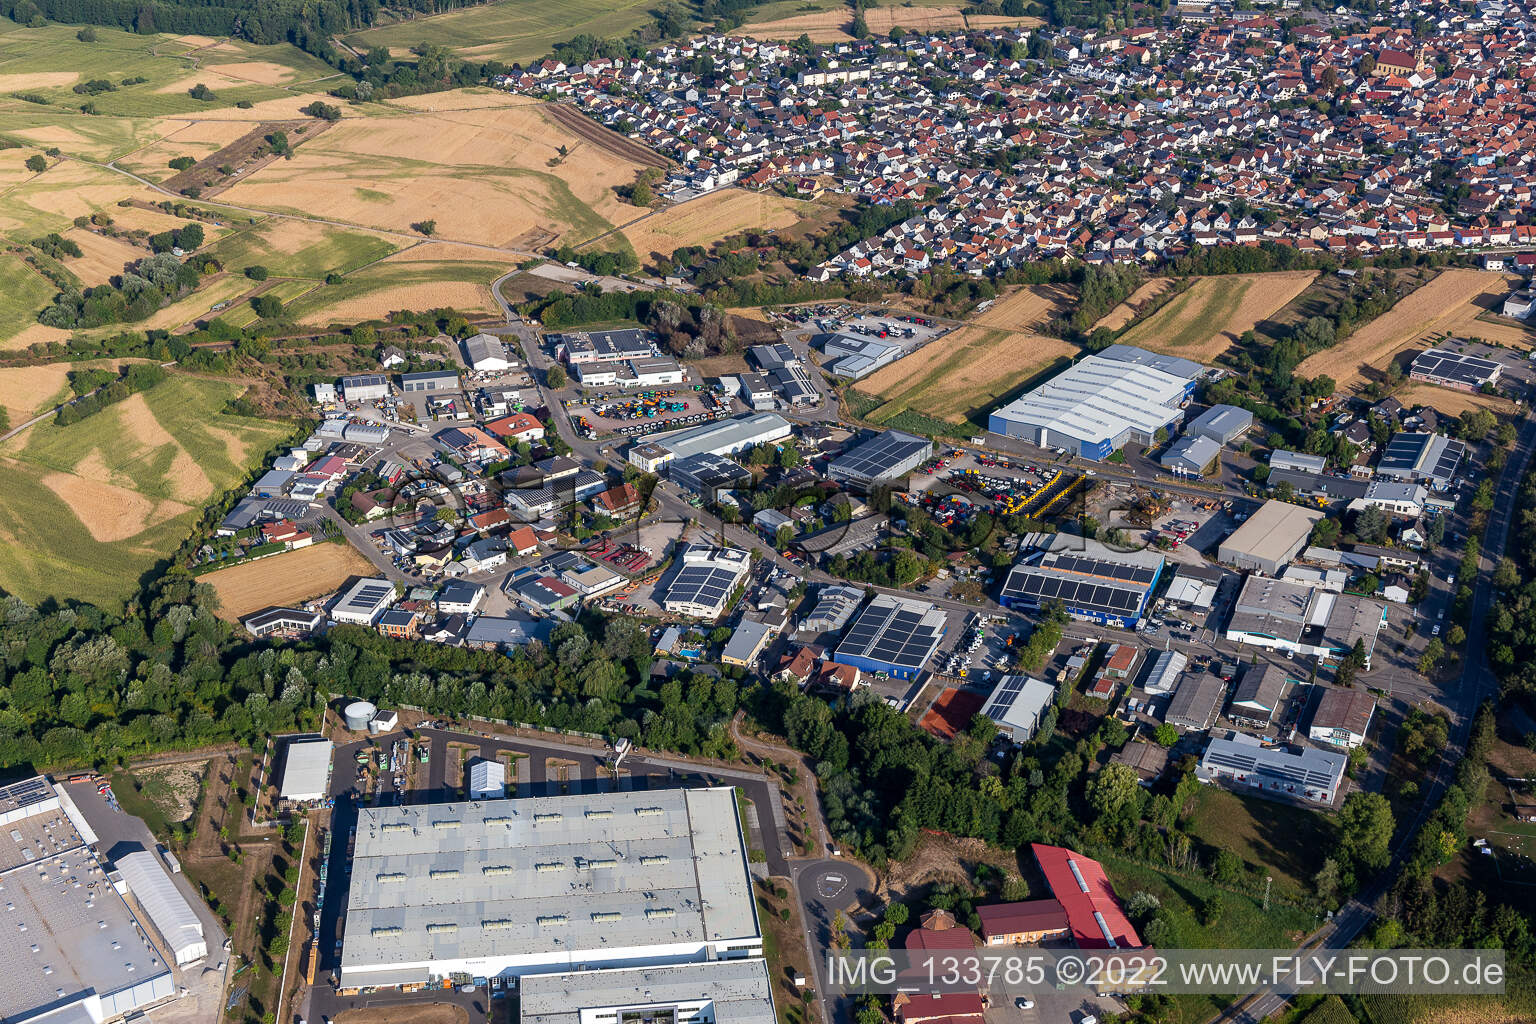 Industrial area Industriestr in Hagenbach in the state Rhineland-Palatinate, Germany